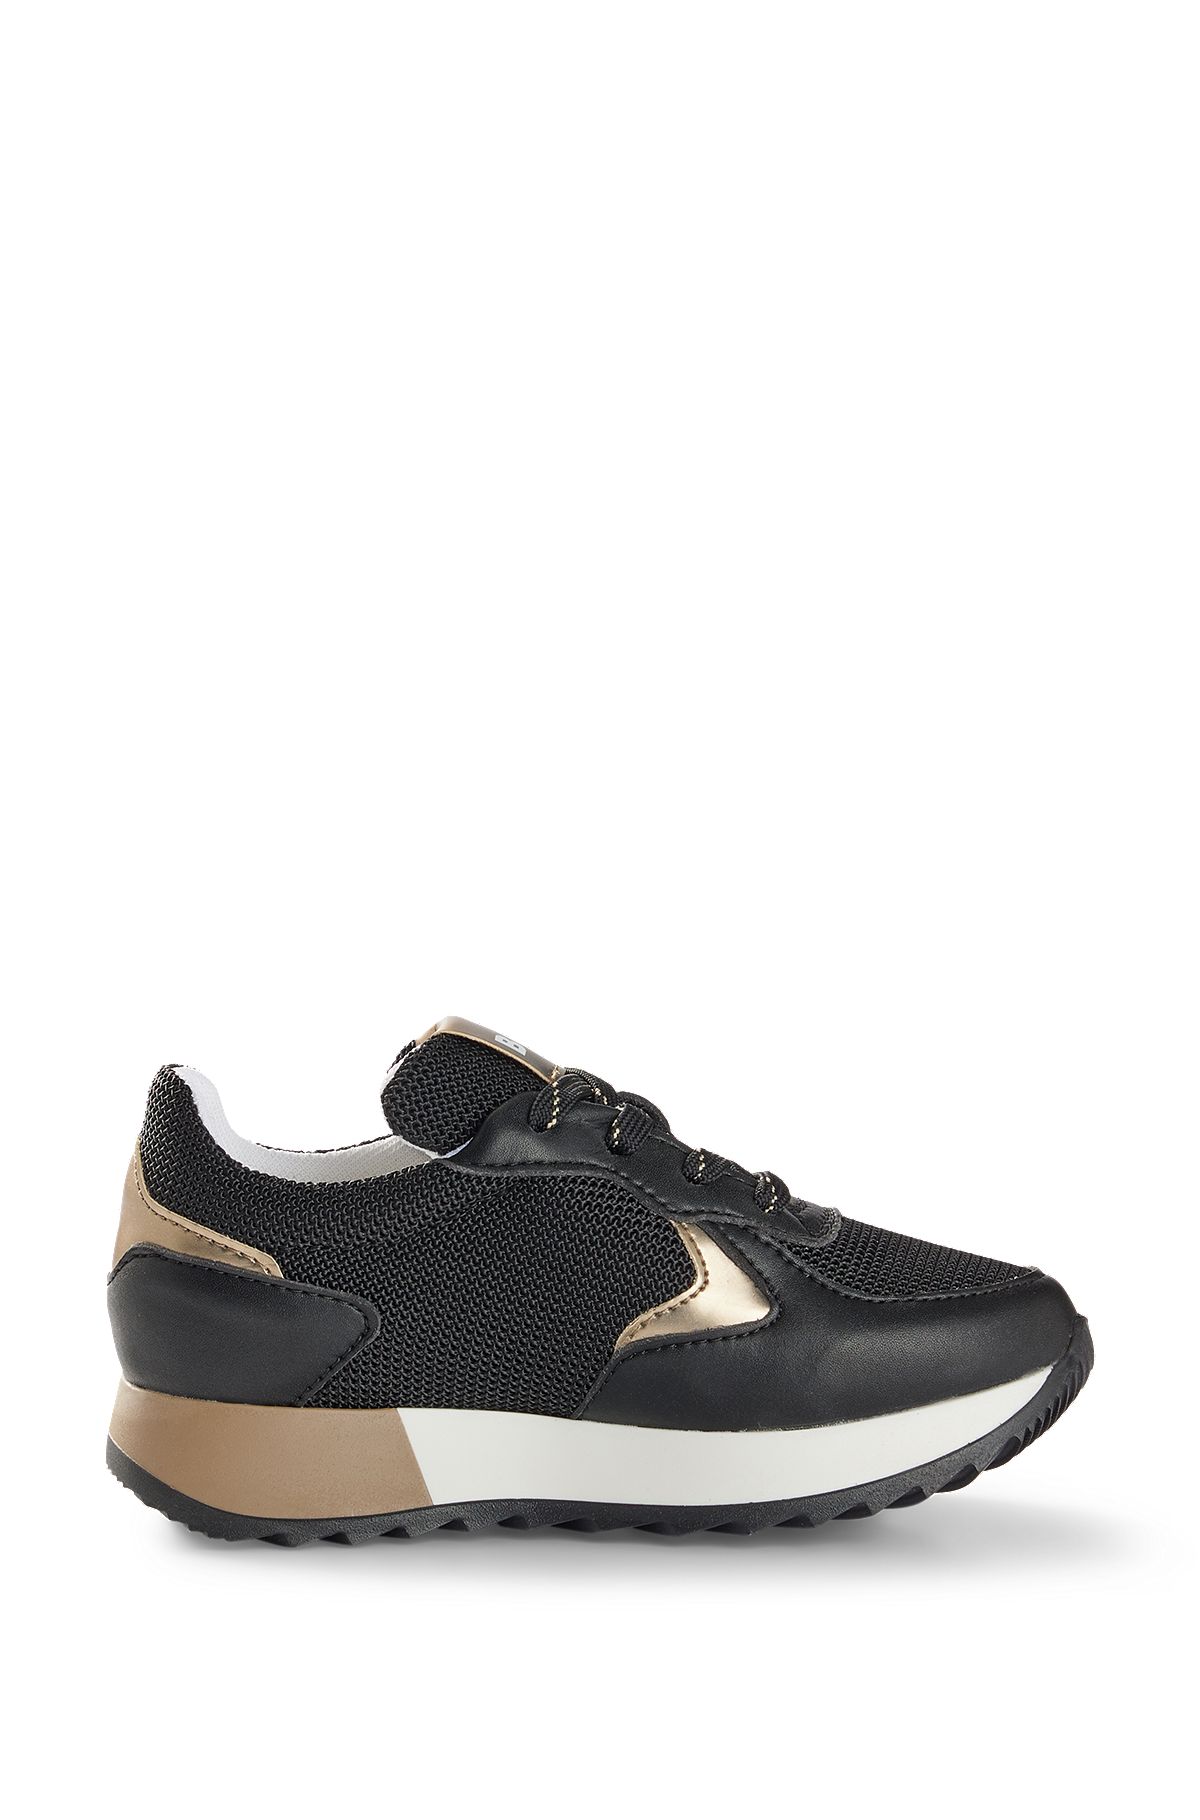 Kids' trainers with faux leather and mesh, Black